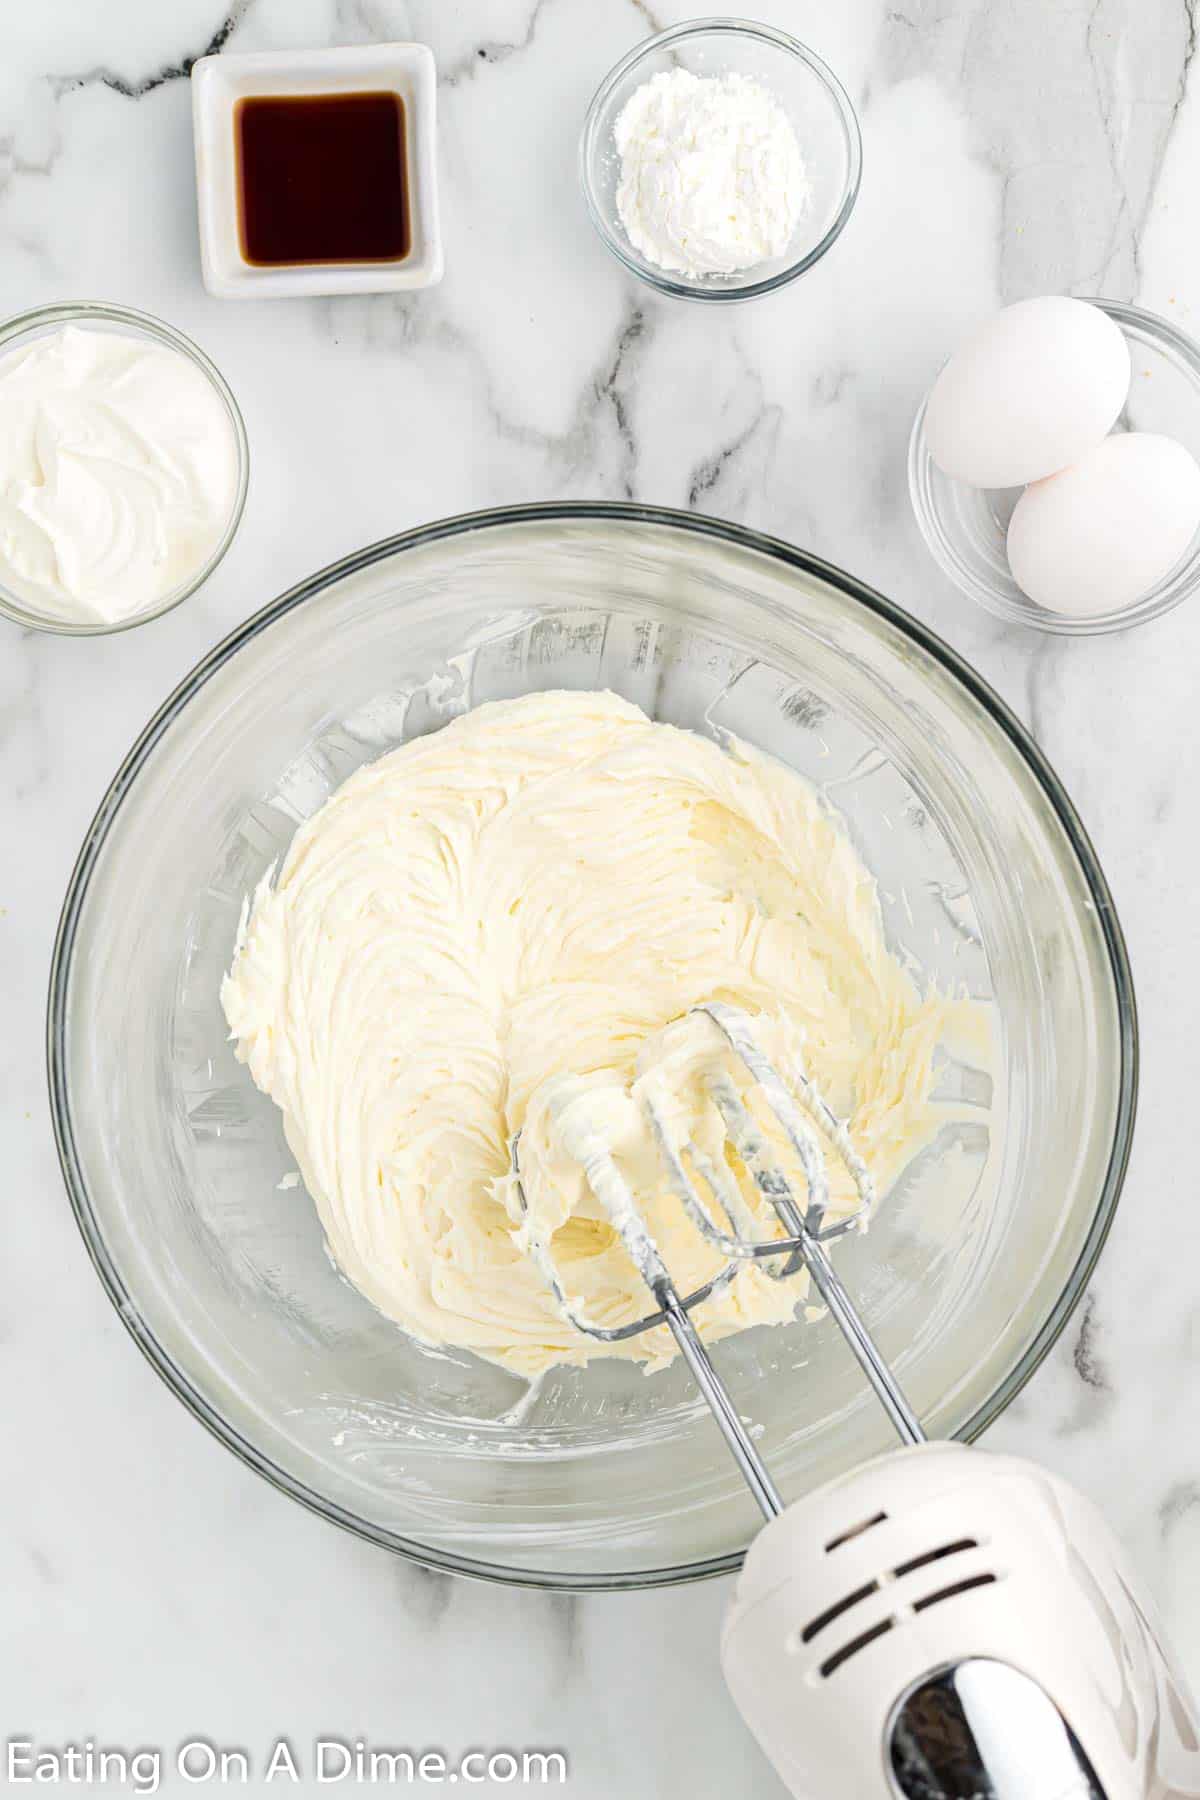 Beating the cream cheese and sugar together in a bowl